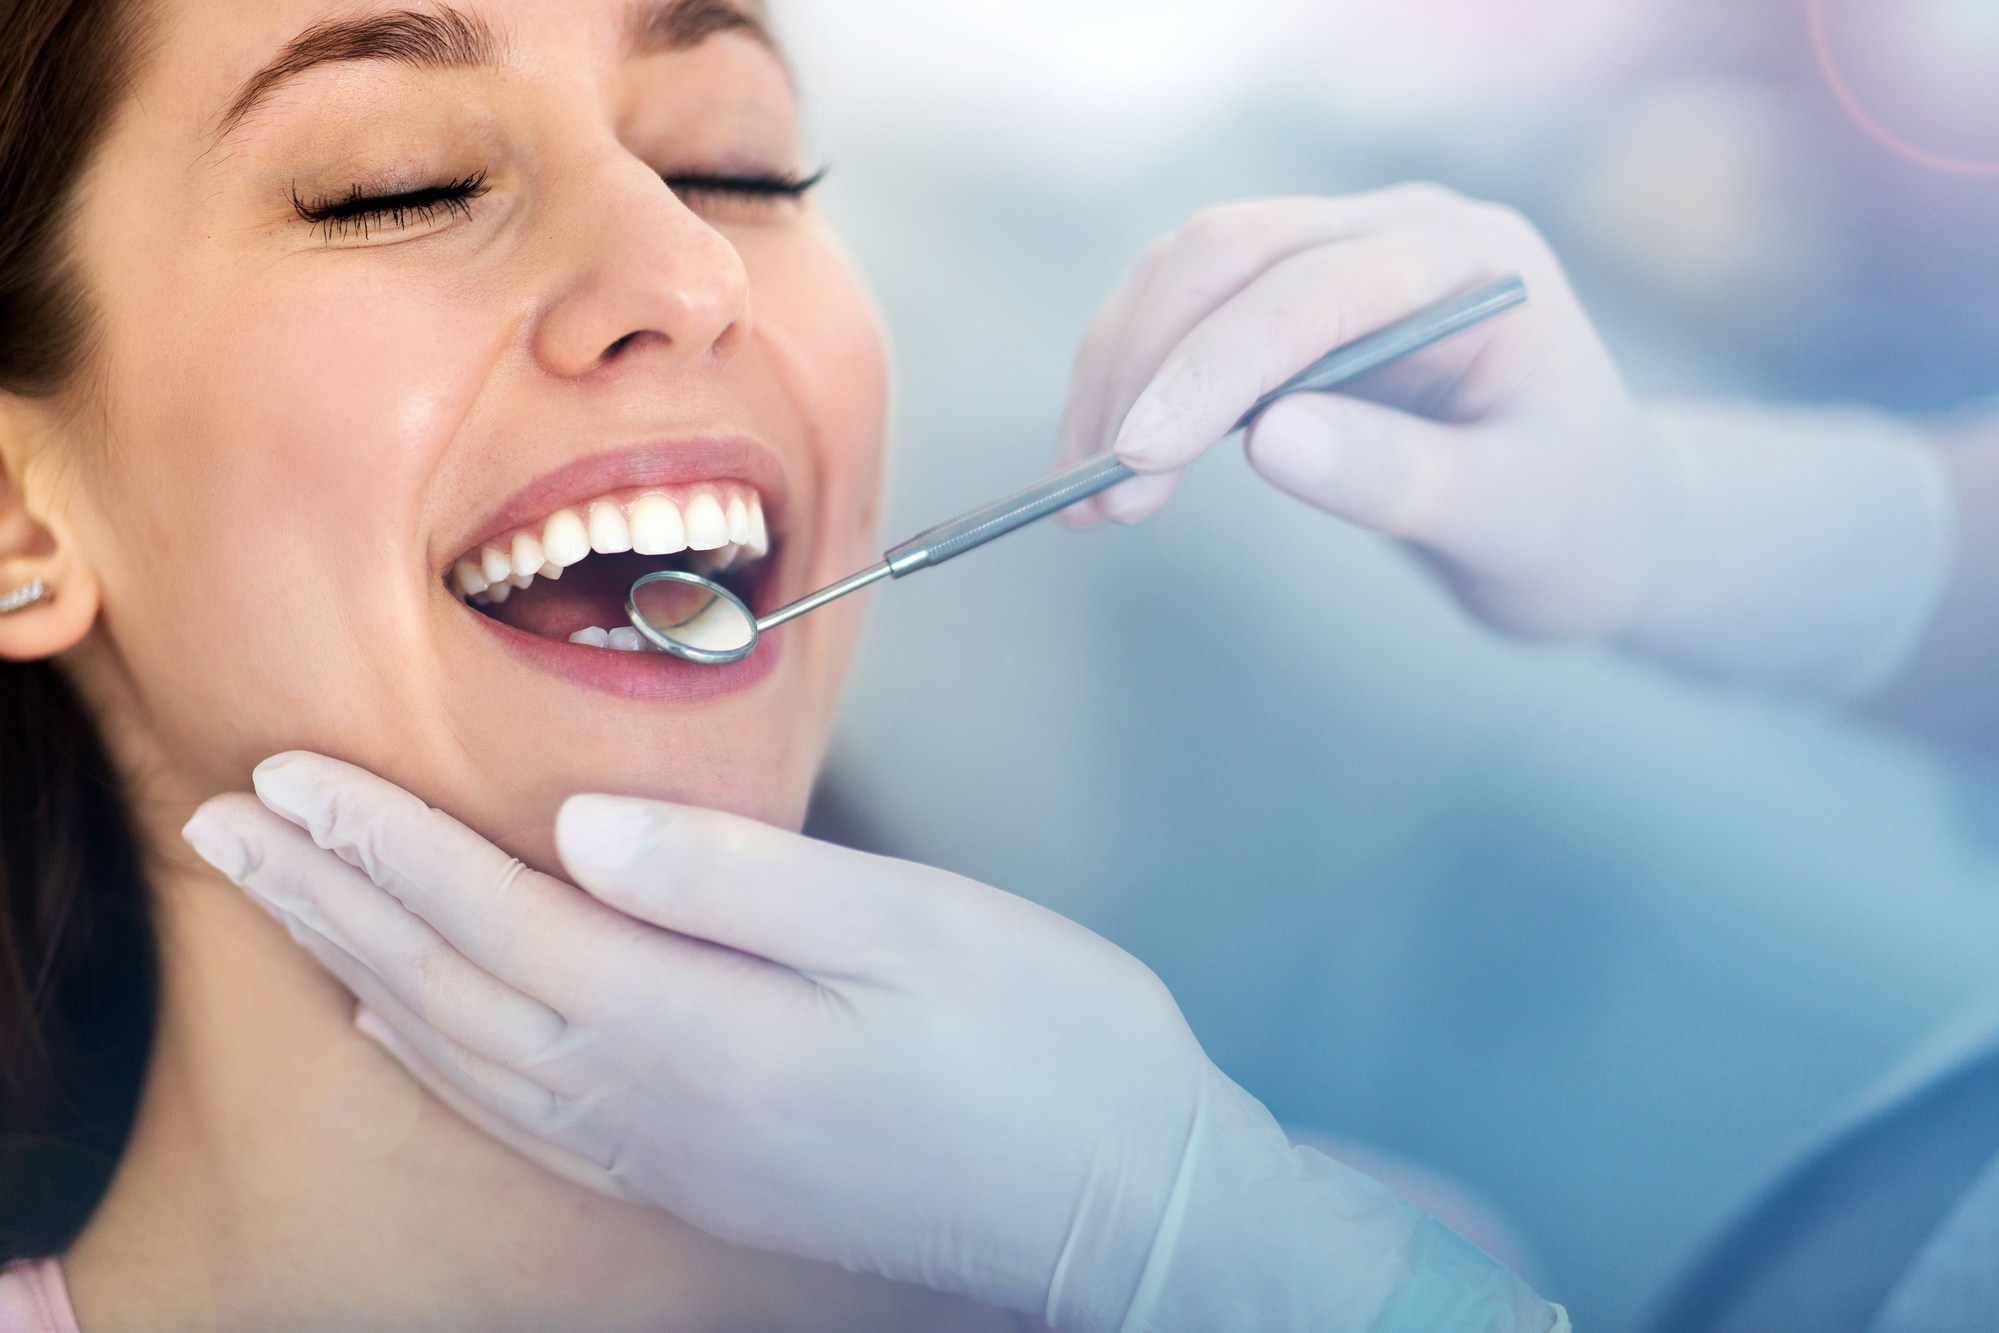 Why Regular Dental Checkups Could Save Your Life